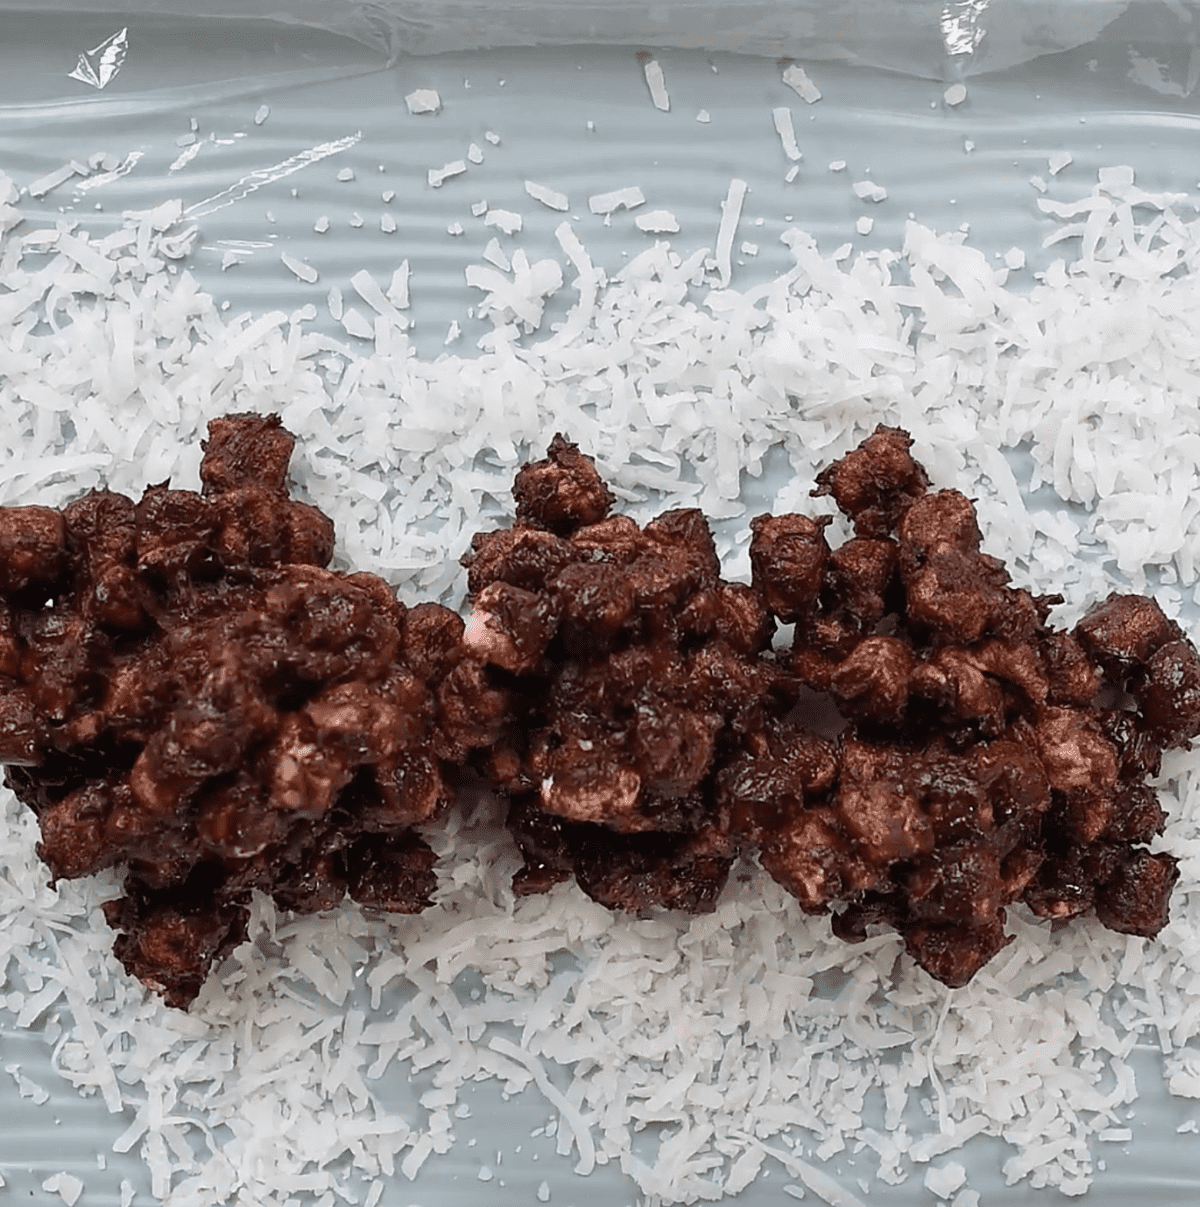 shredded coconut and chocolate marshmallows mixture spread over plastic wrap